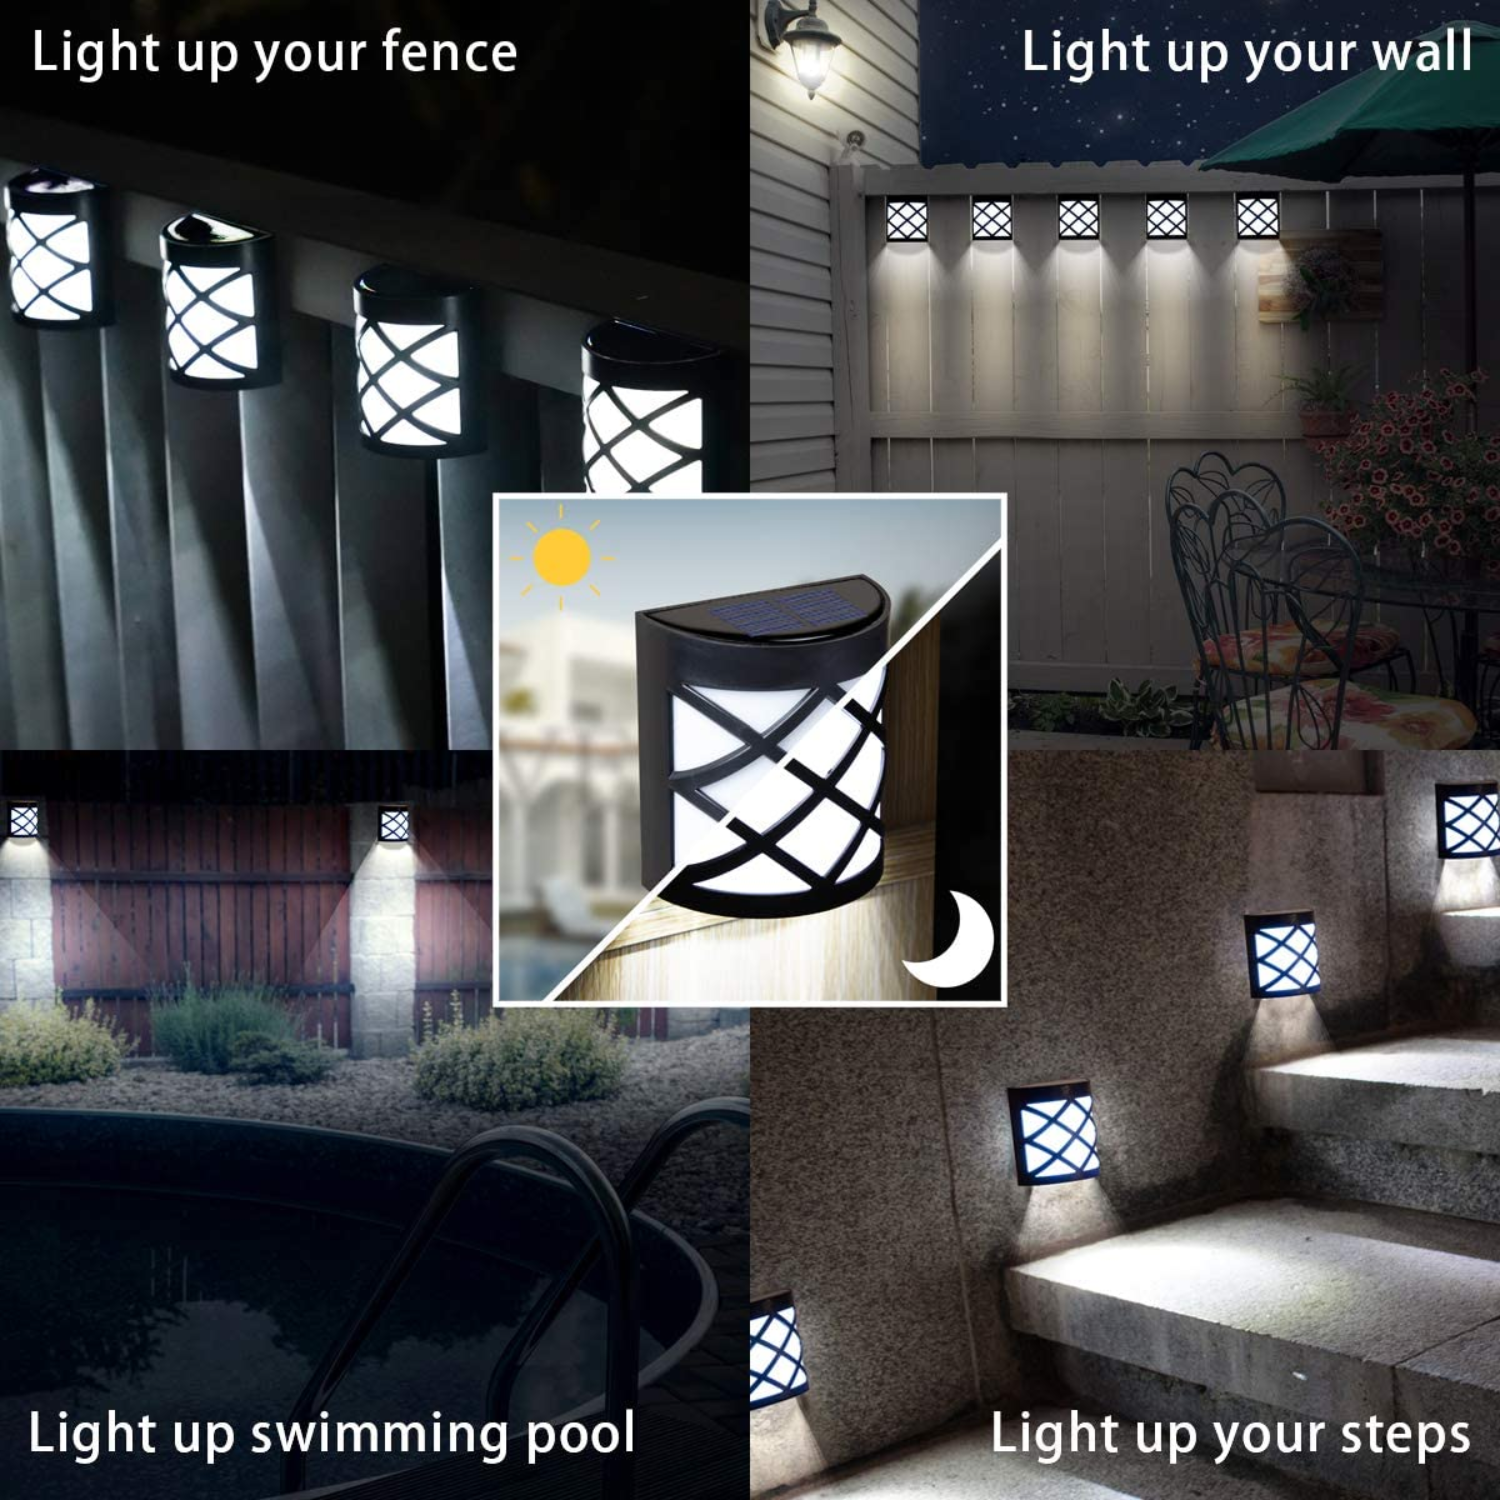 DMak Solar Fence Lights Waterproof Automatic Decorative Outdoor Solar Wall Lights for Deck, Patio, Stairs, Yard, Path and Driveway.